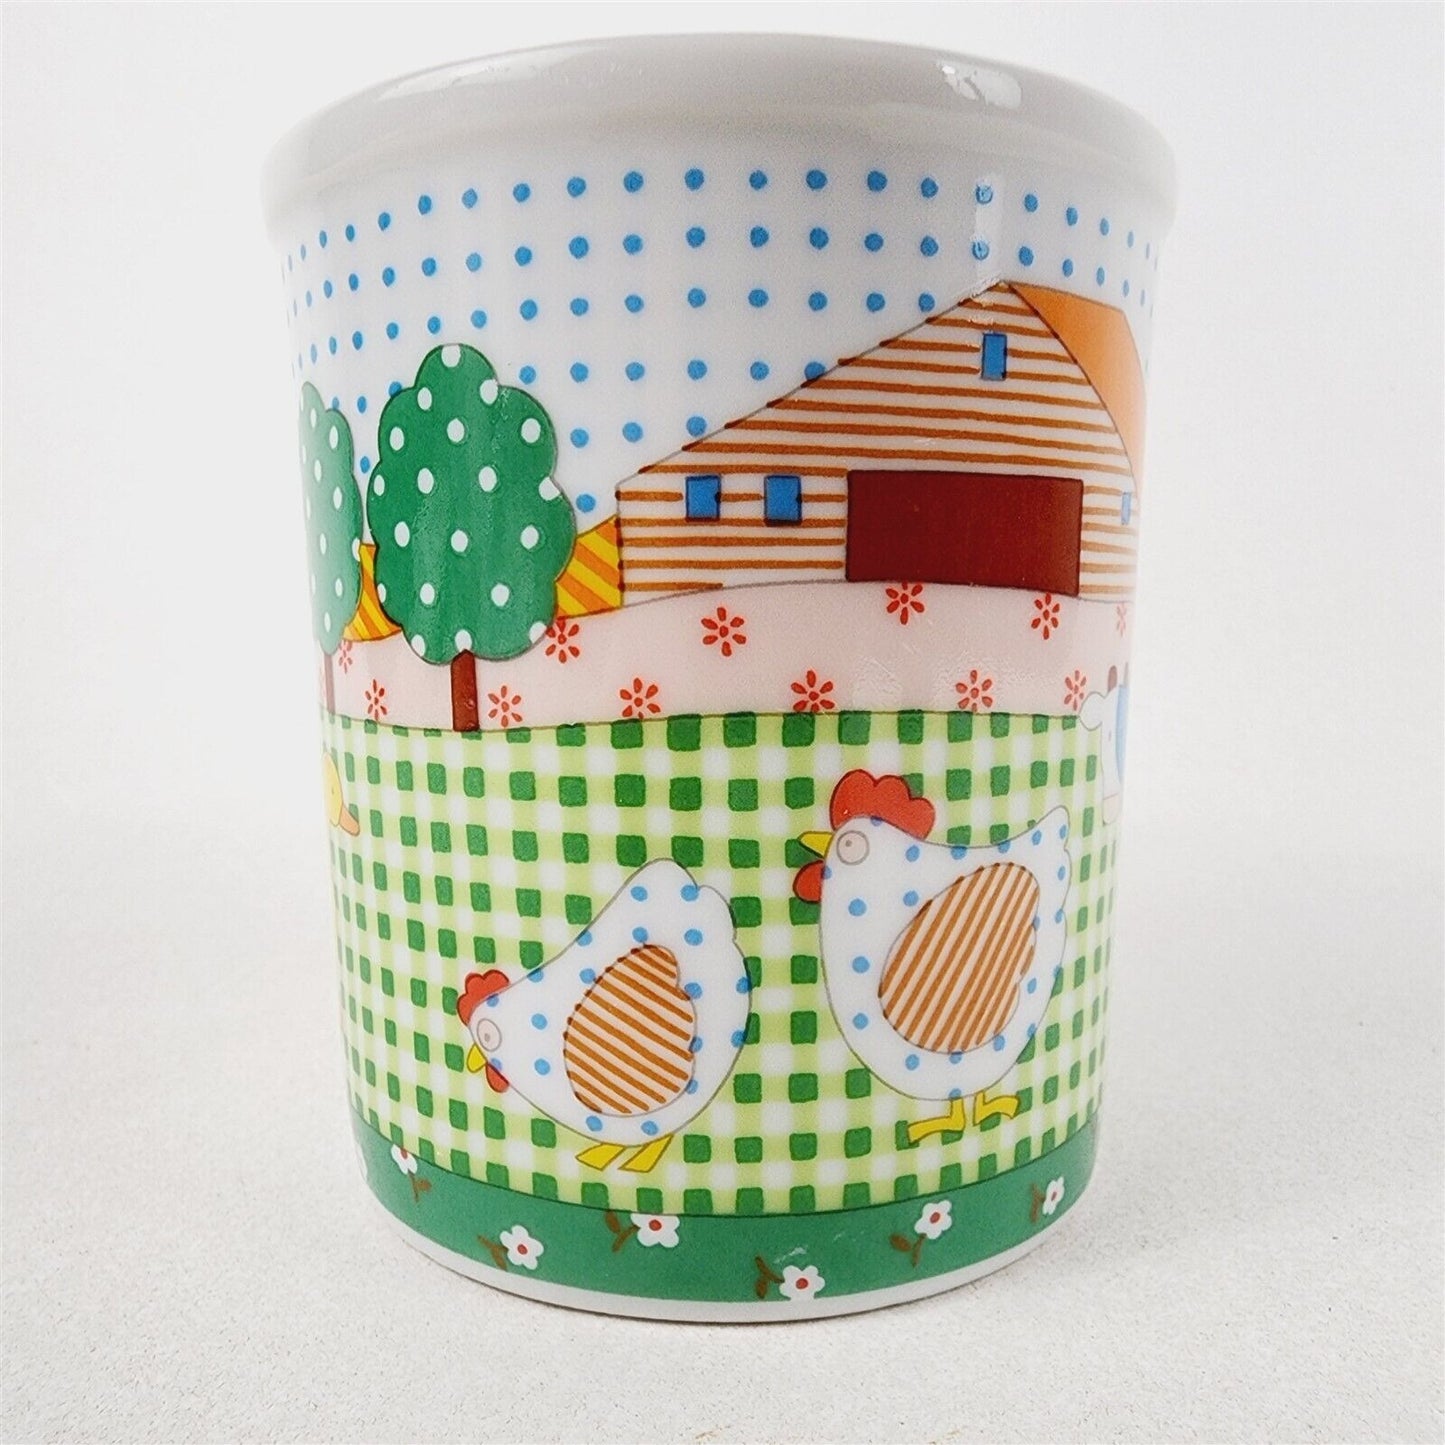 Vintage Coffee Cup Mug Country Quilt Ducks Blue Dot - 3 1/2" tall